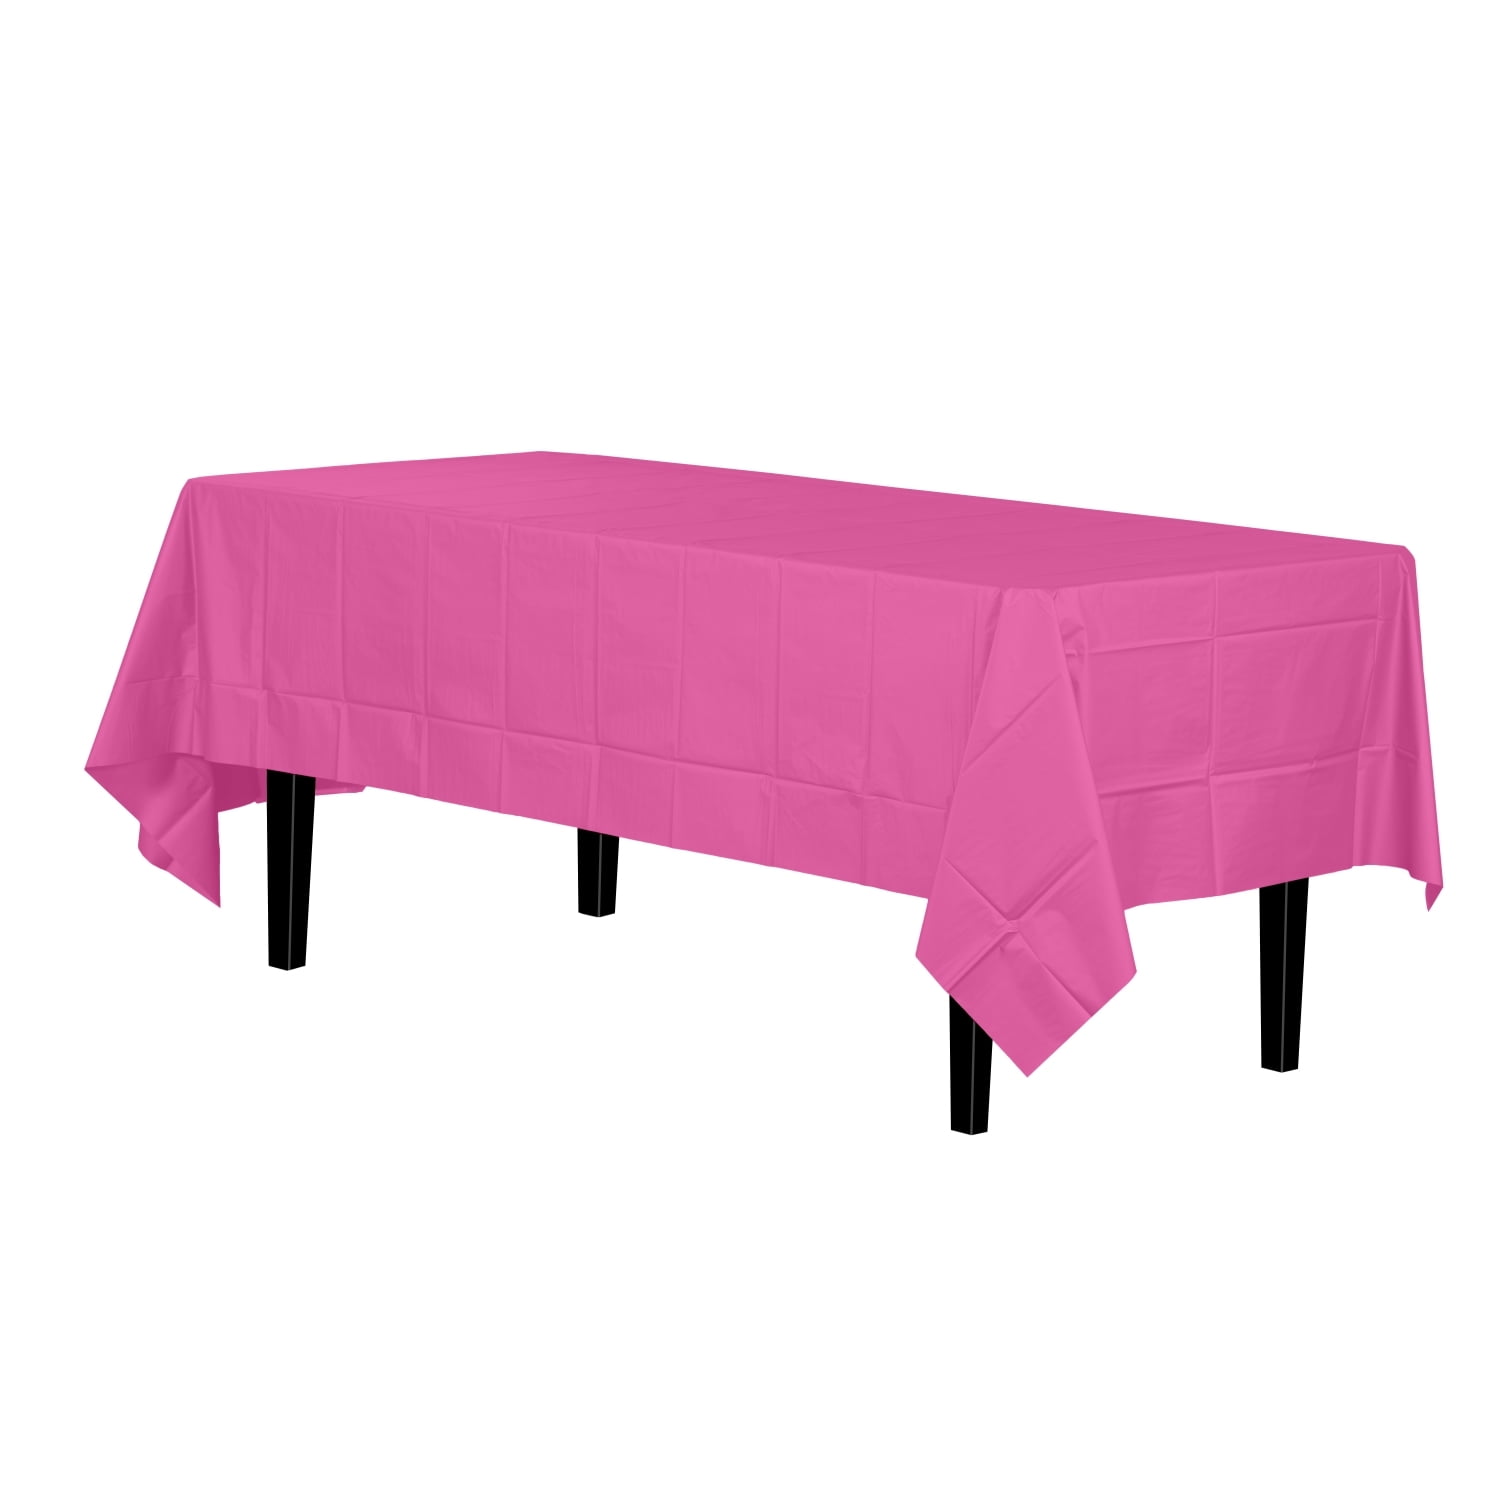 Party Table Cloth Plastic Rectangular 54 X 108 Inch Pink 1ct BRAND NEW 